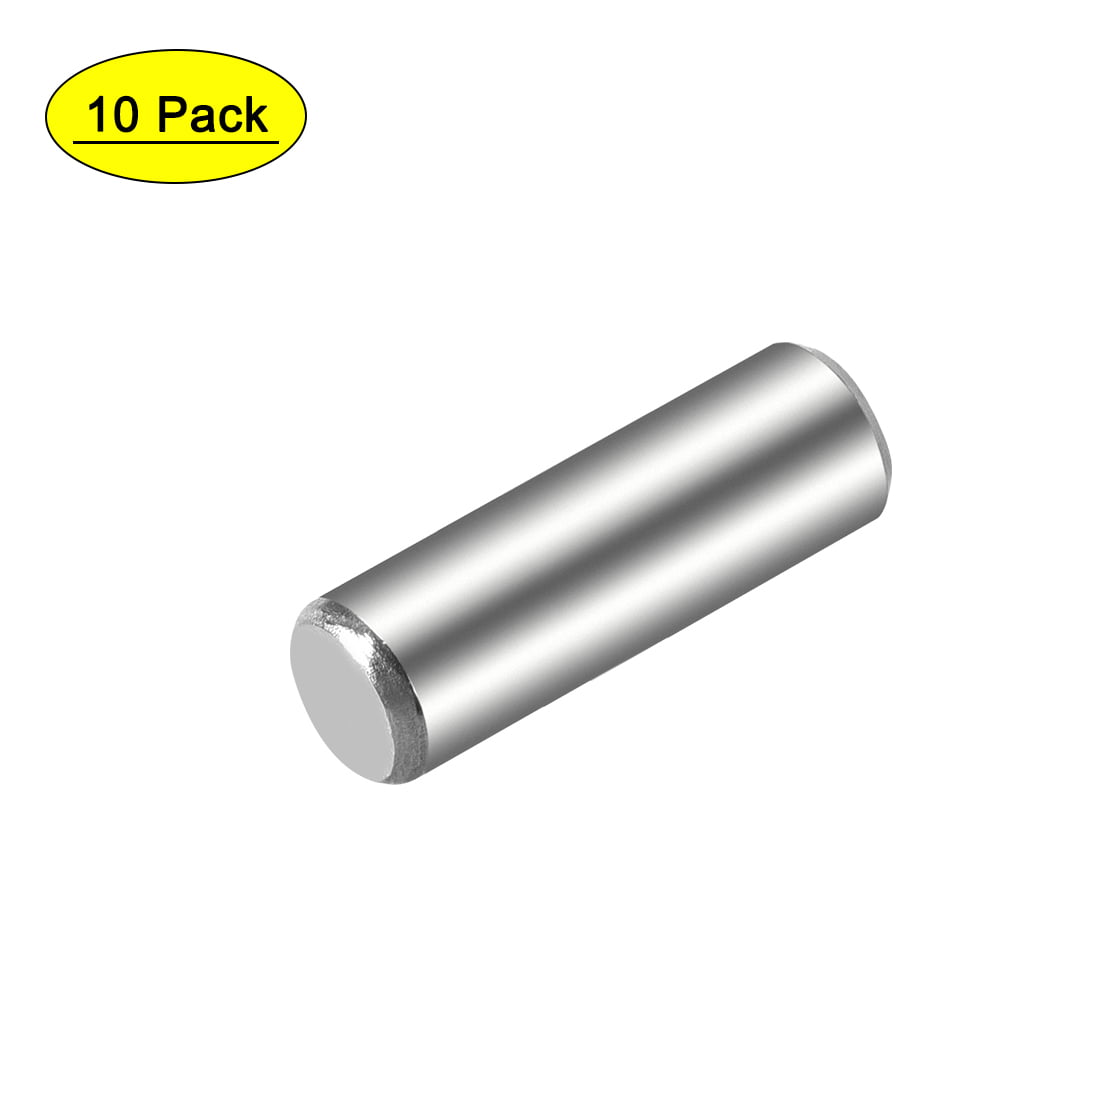 18-8 Stainless Steel Dowel Pins 5/32" Dia x 3/8" Length 50 Pieces 